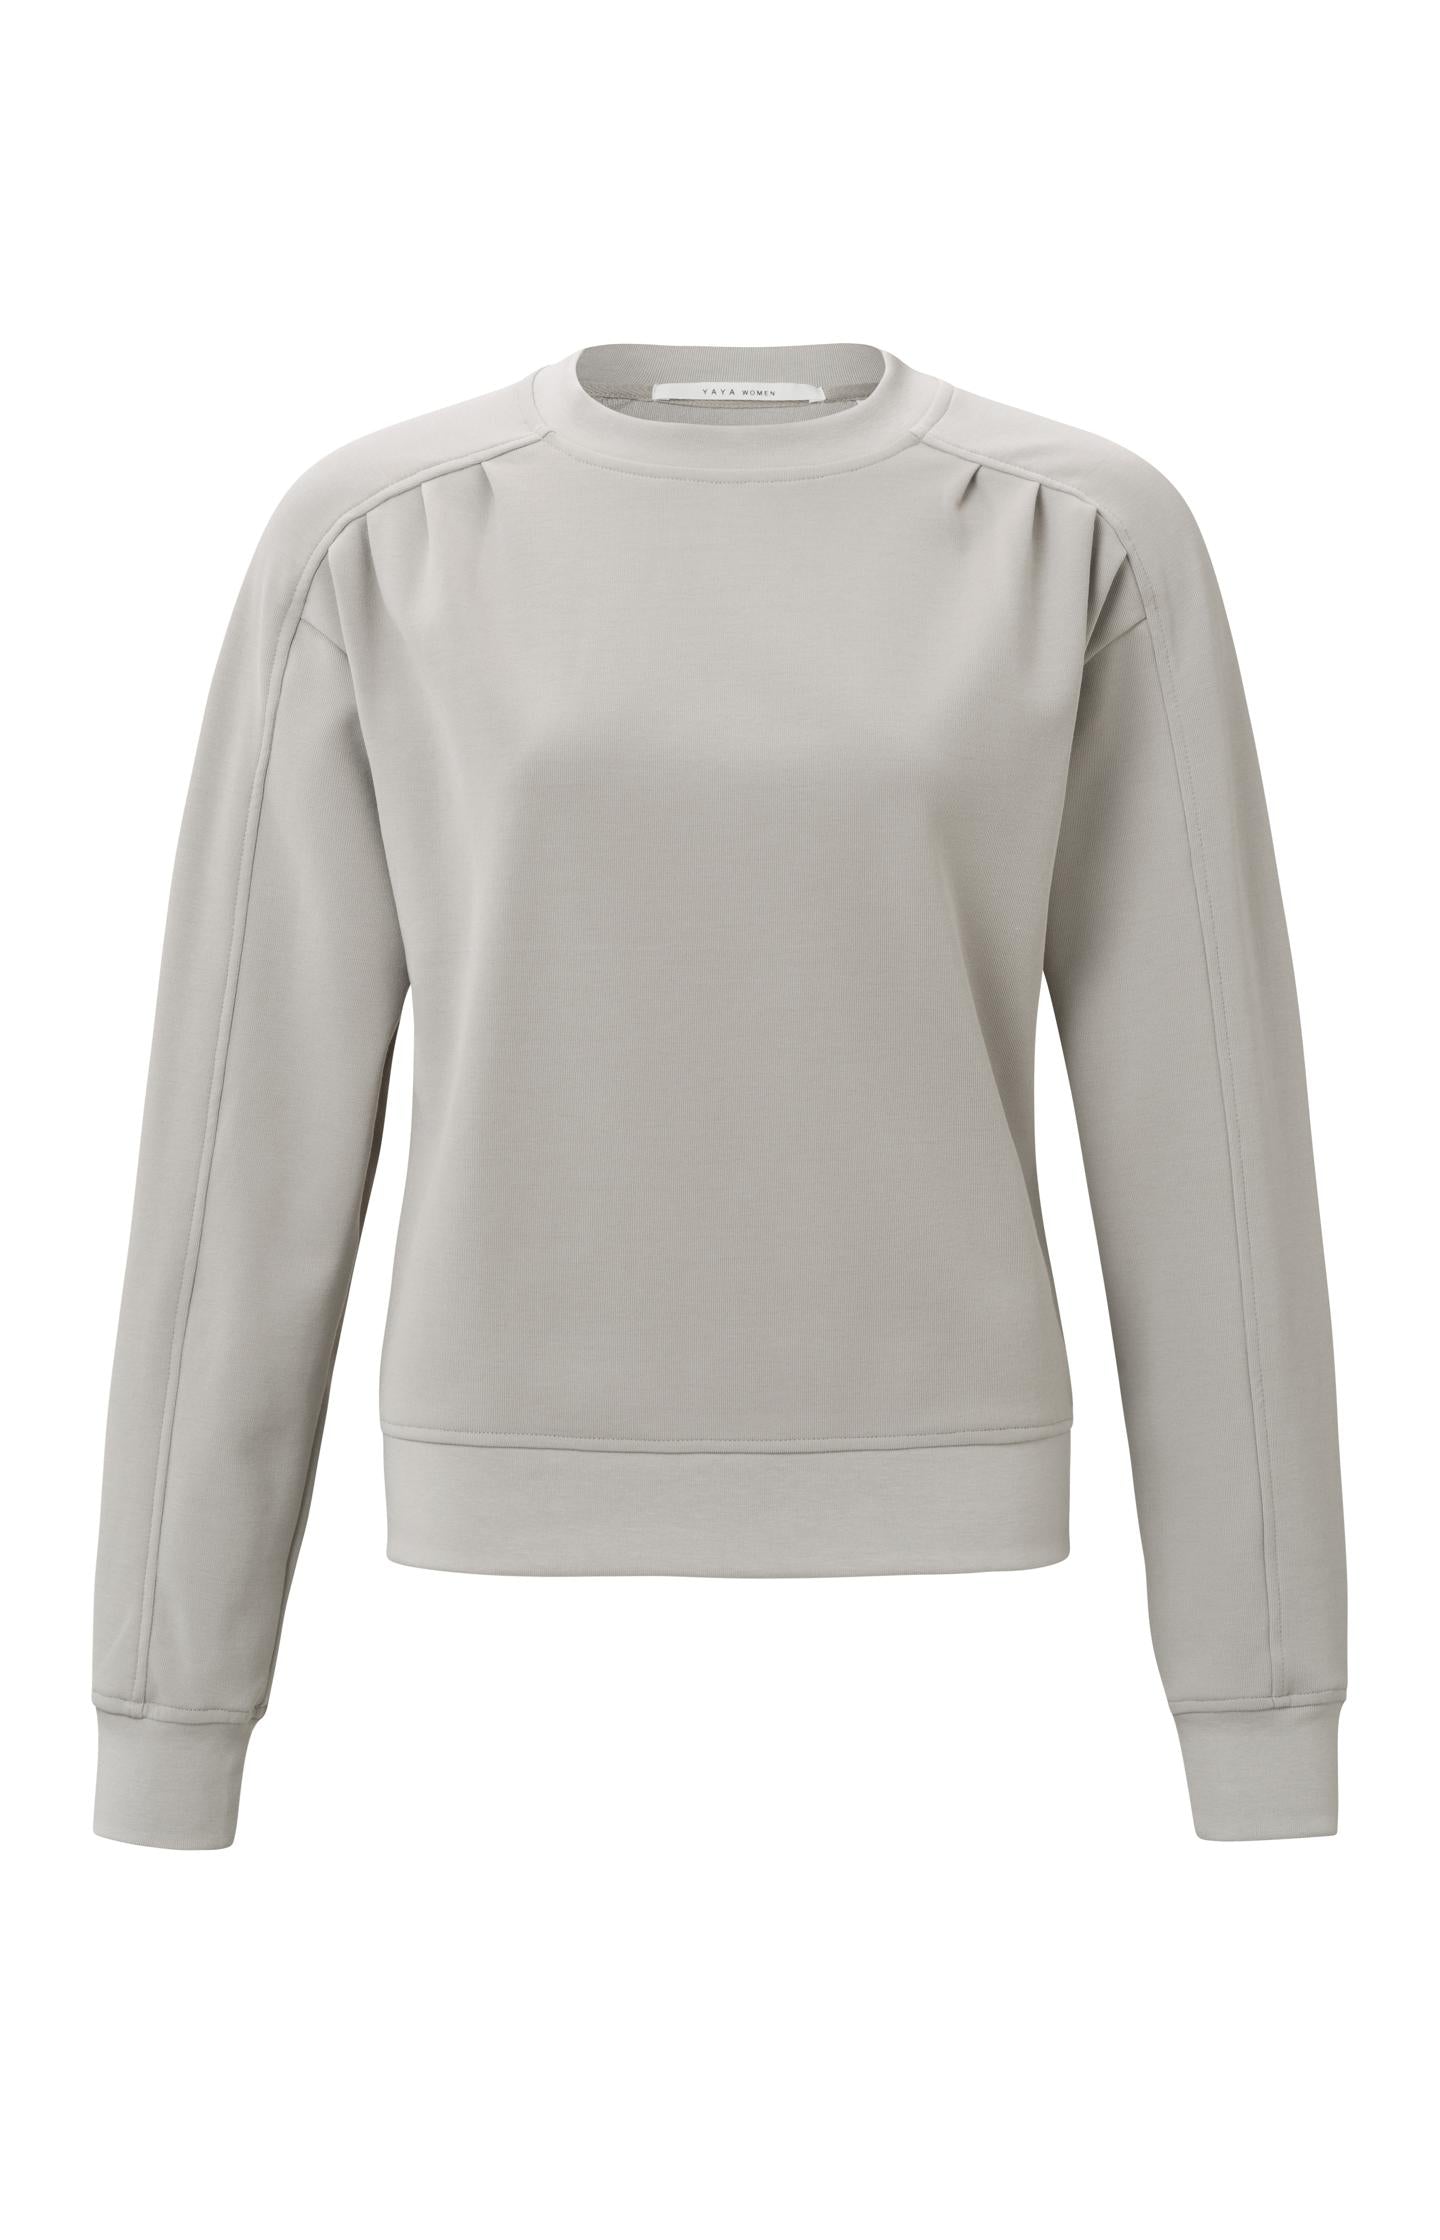 Sweatshirt with crewneck, long sleeves and pleated details - Type: product